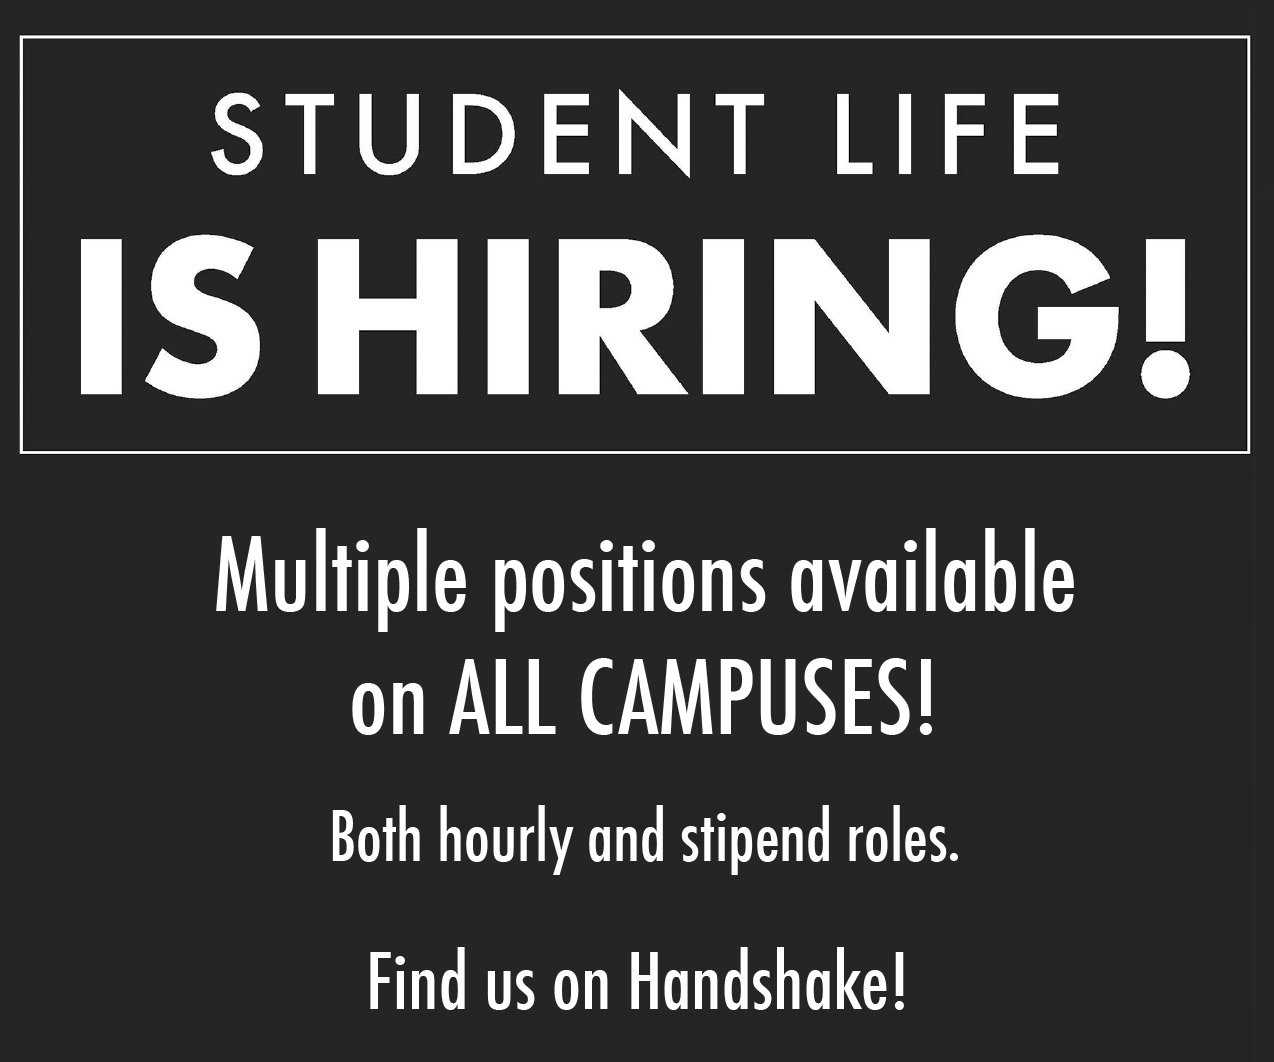 Student Life is Hiring. Multiple positions available at all campuses. Find us on Handshake.